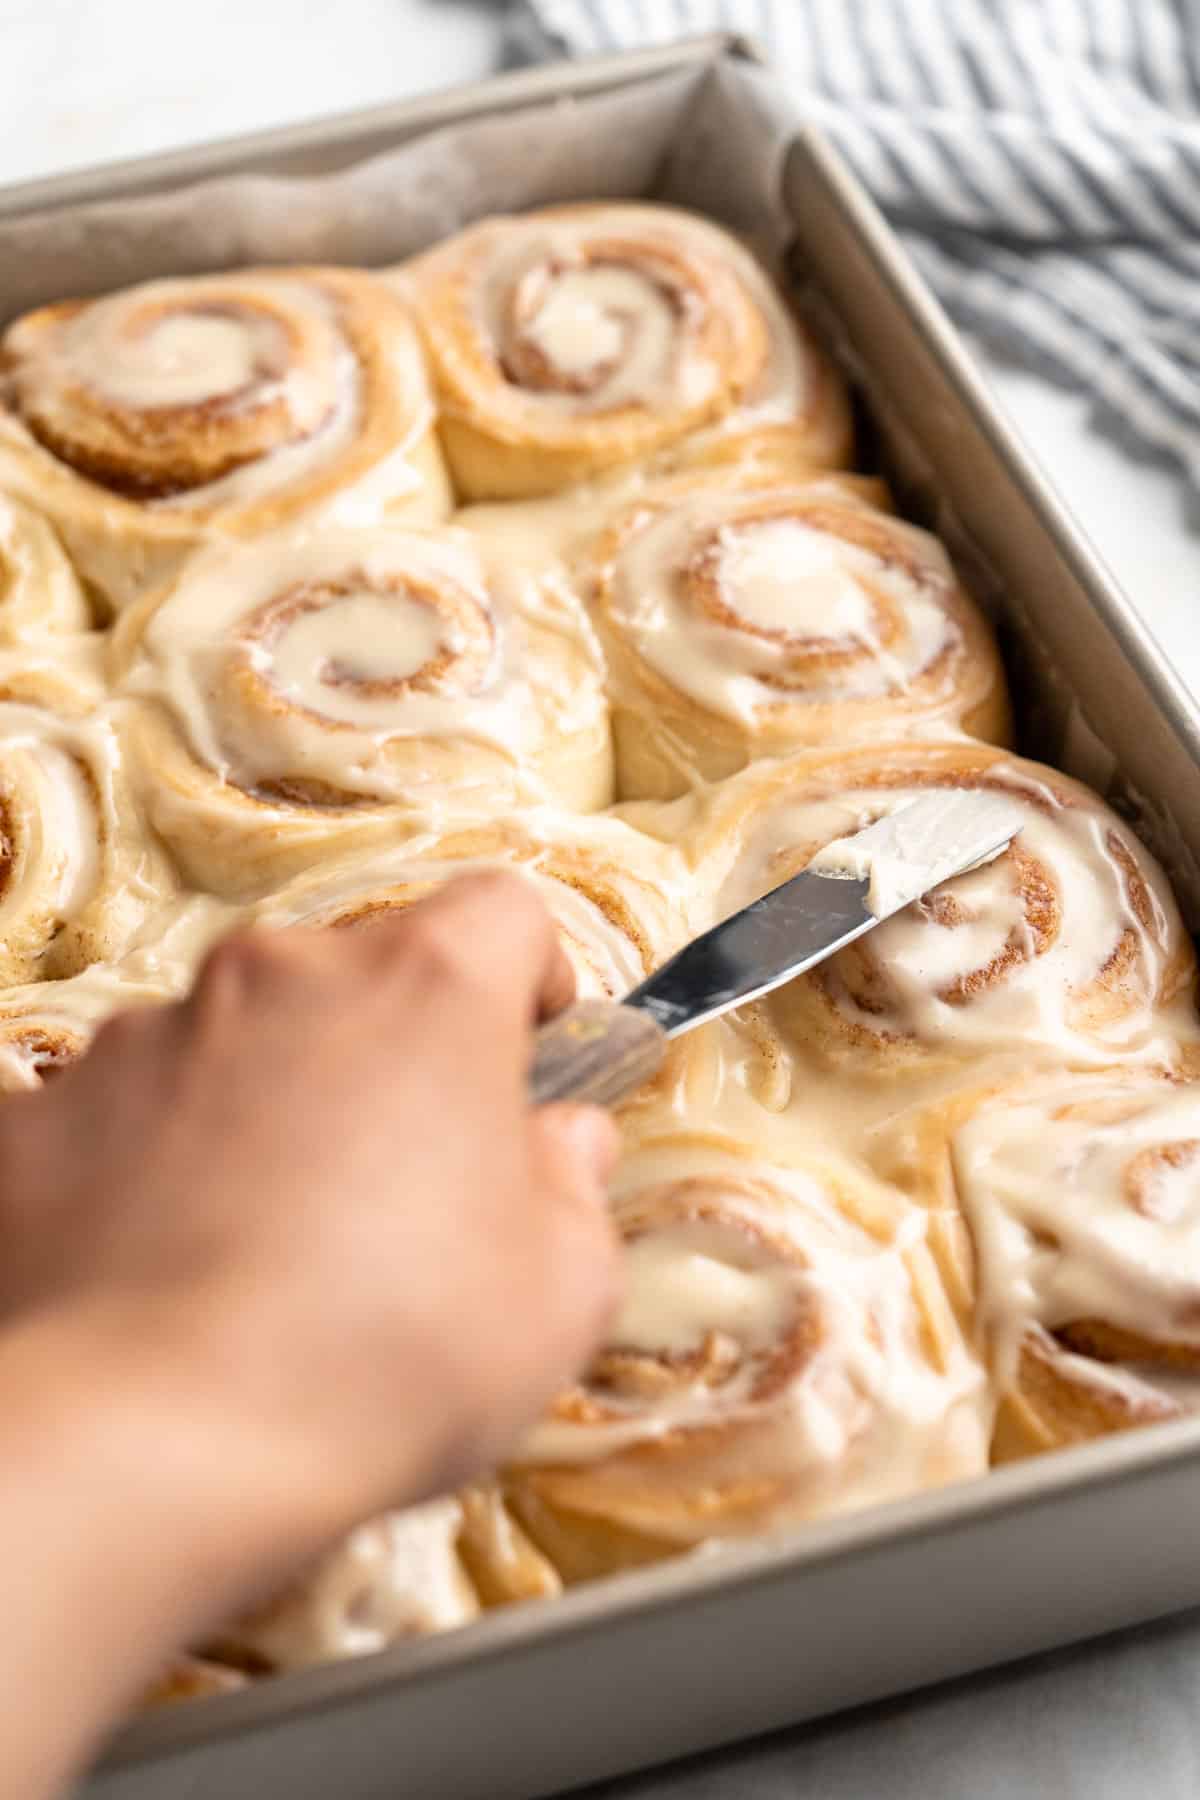 Using a knife to spread frosting on cinnamon rolls.